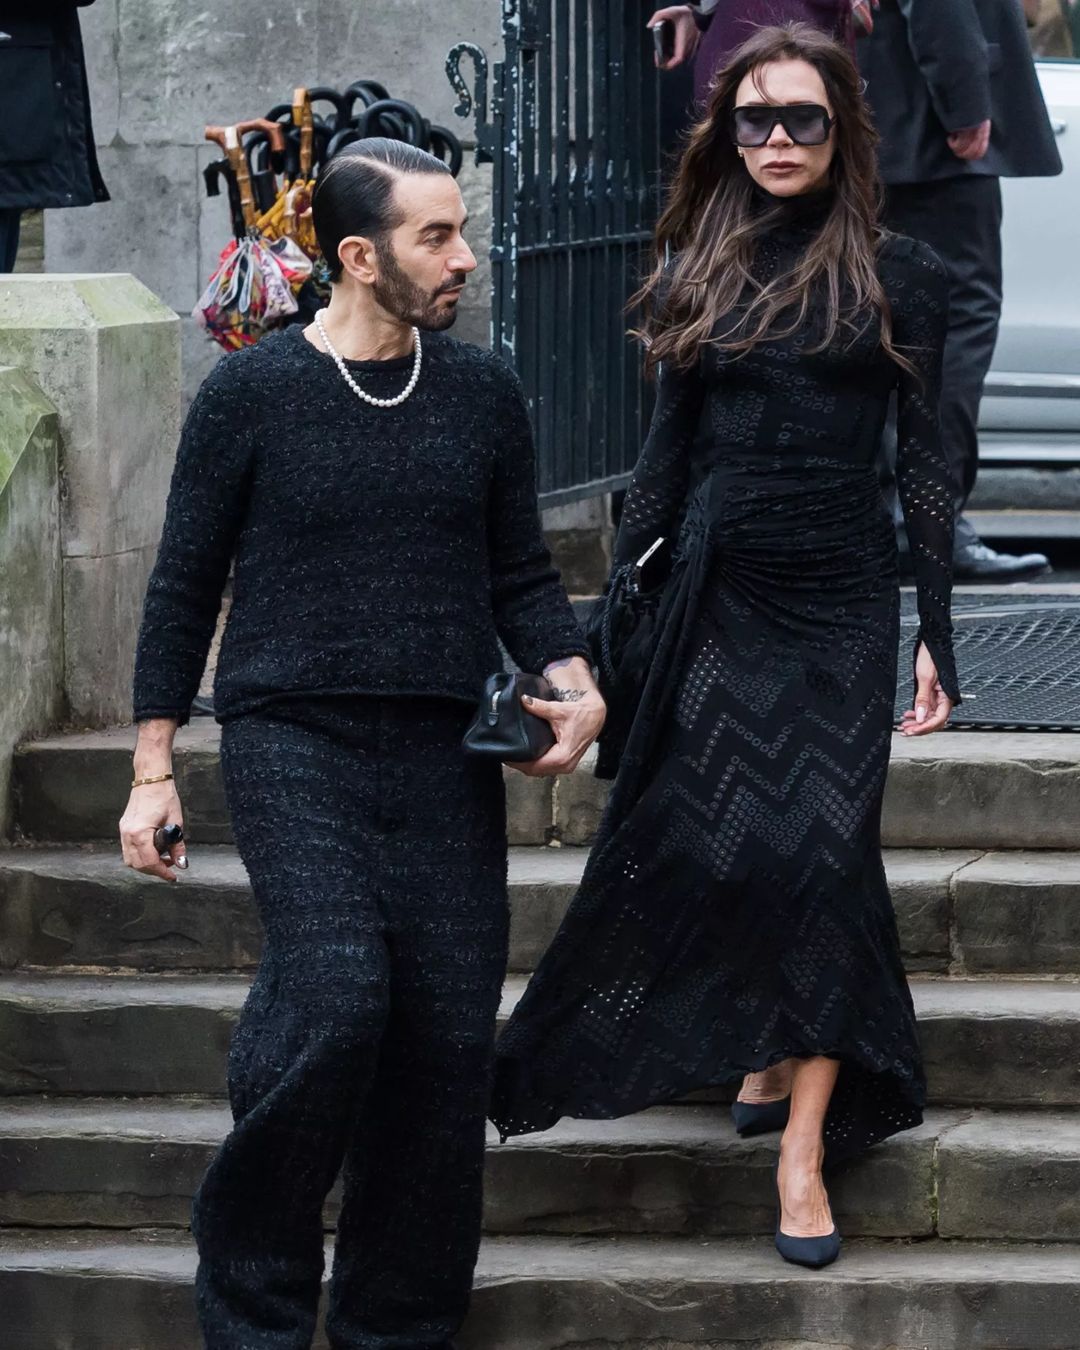 Marc Jacobs and Victoria Beckham at Vivienne Westwood Memorial